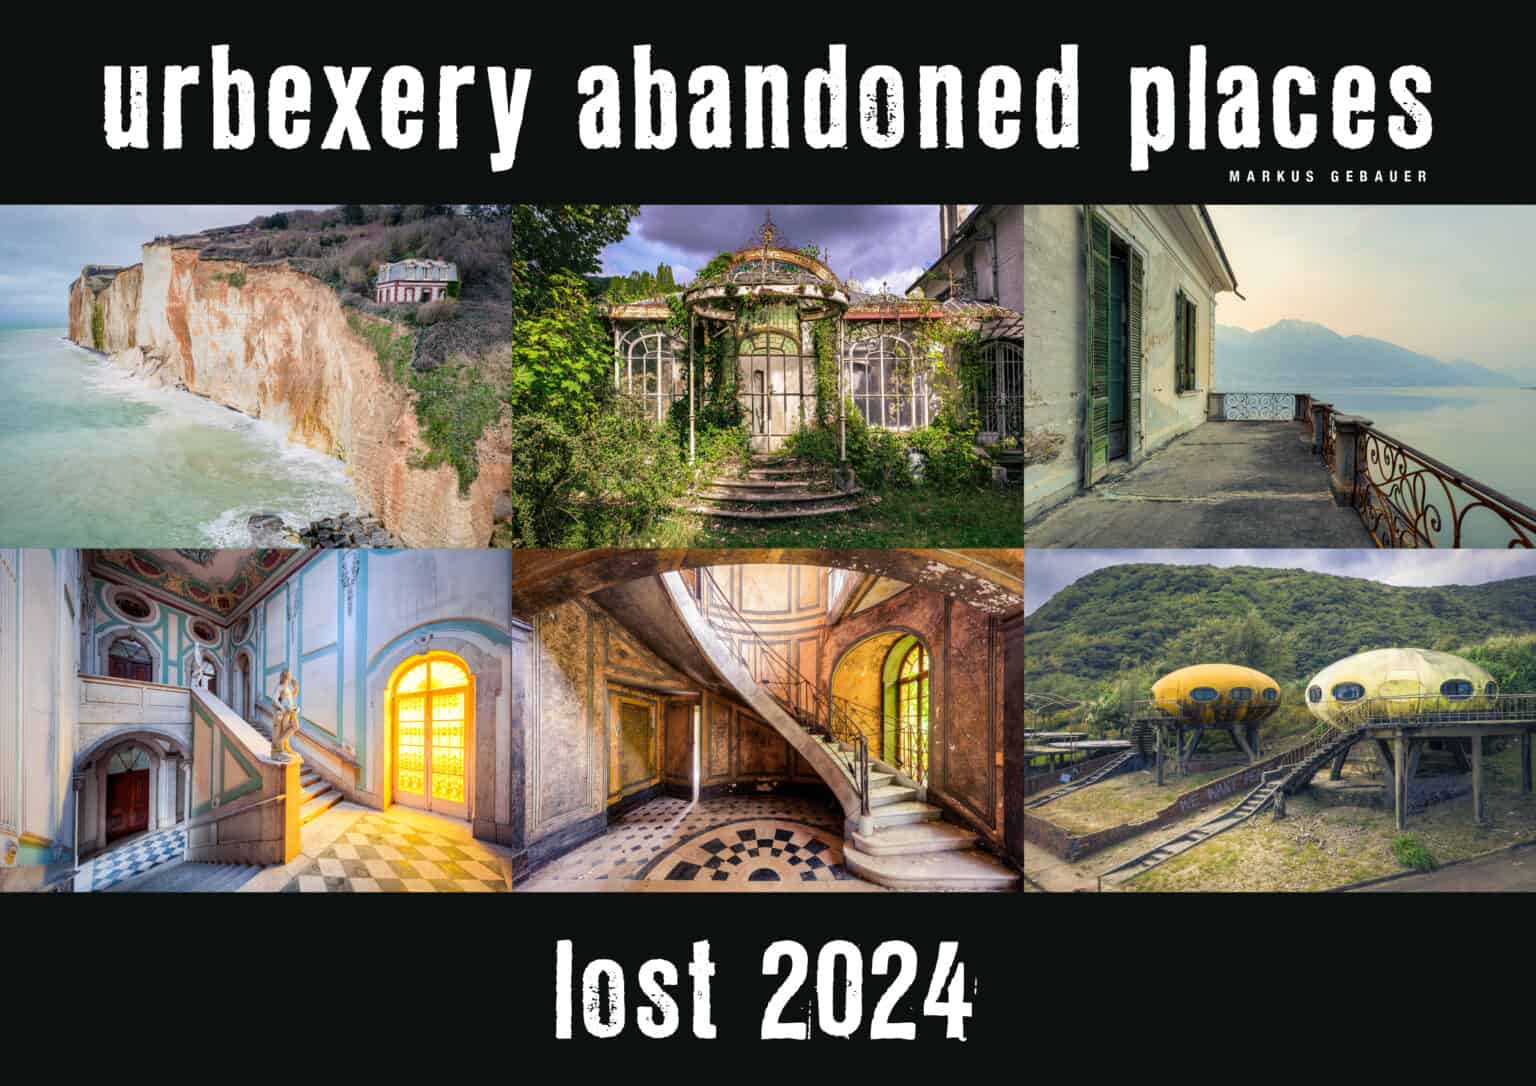 Urbexery Abandoned Places Wall Calendar 2024 Size A3 New